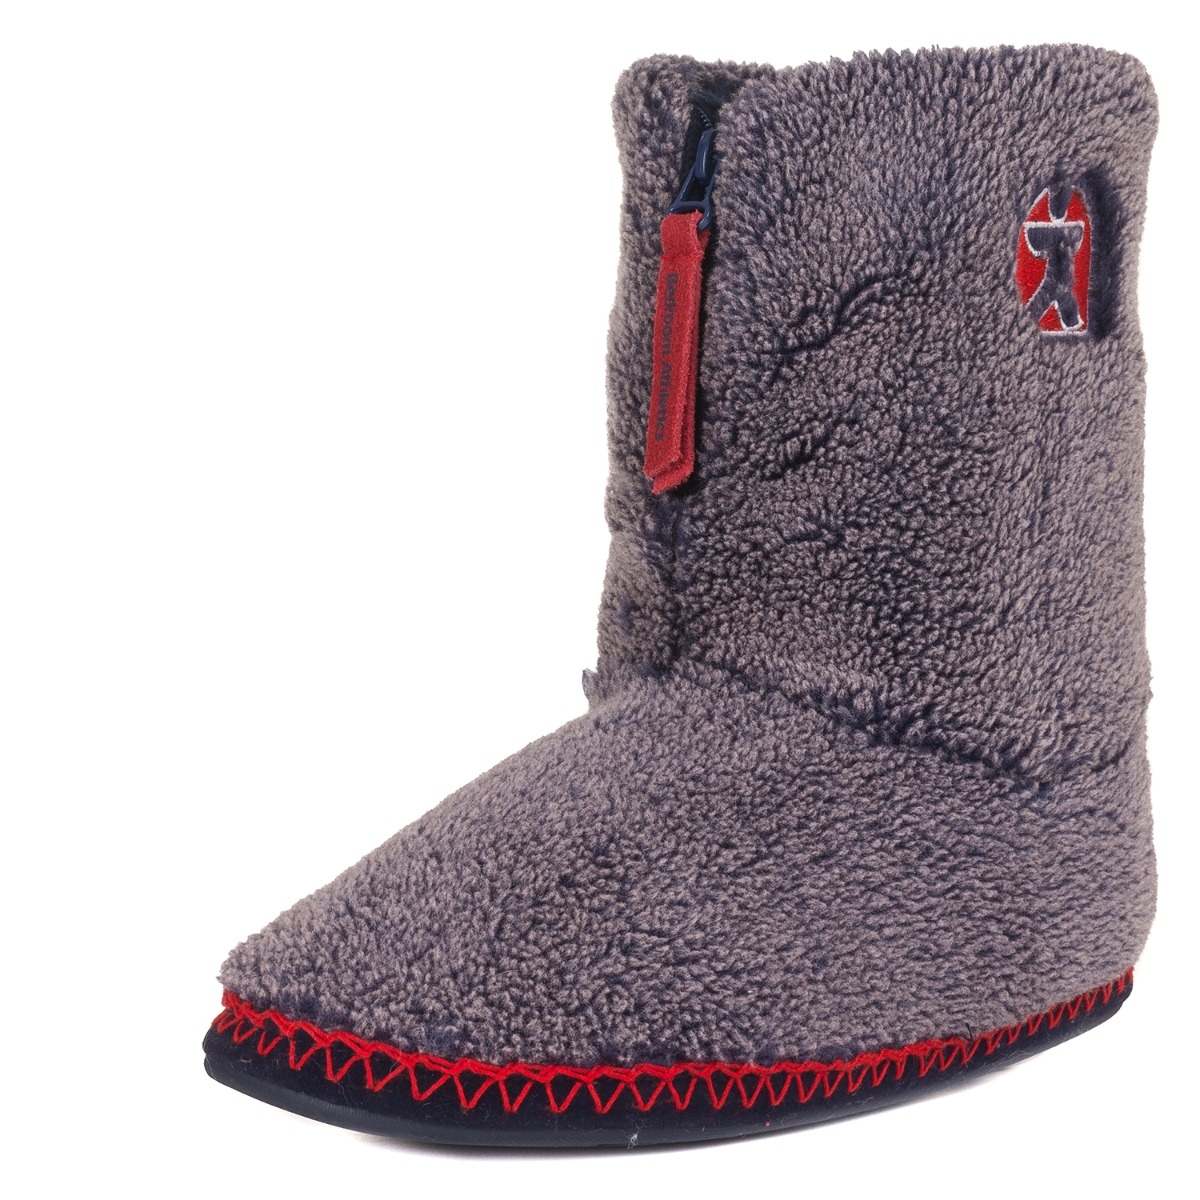 Crowe Snow Tipped Sherpa Slipper Boots – Extra Large – Washed Peacoat Navy – WoMen’s – Bedroom Athletics